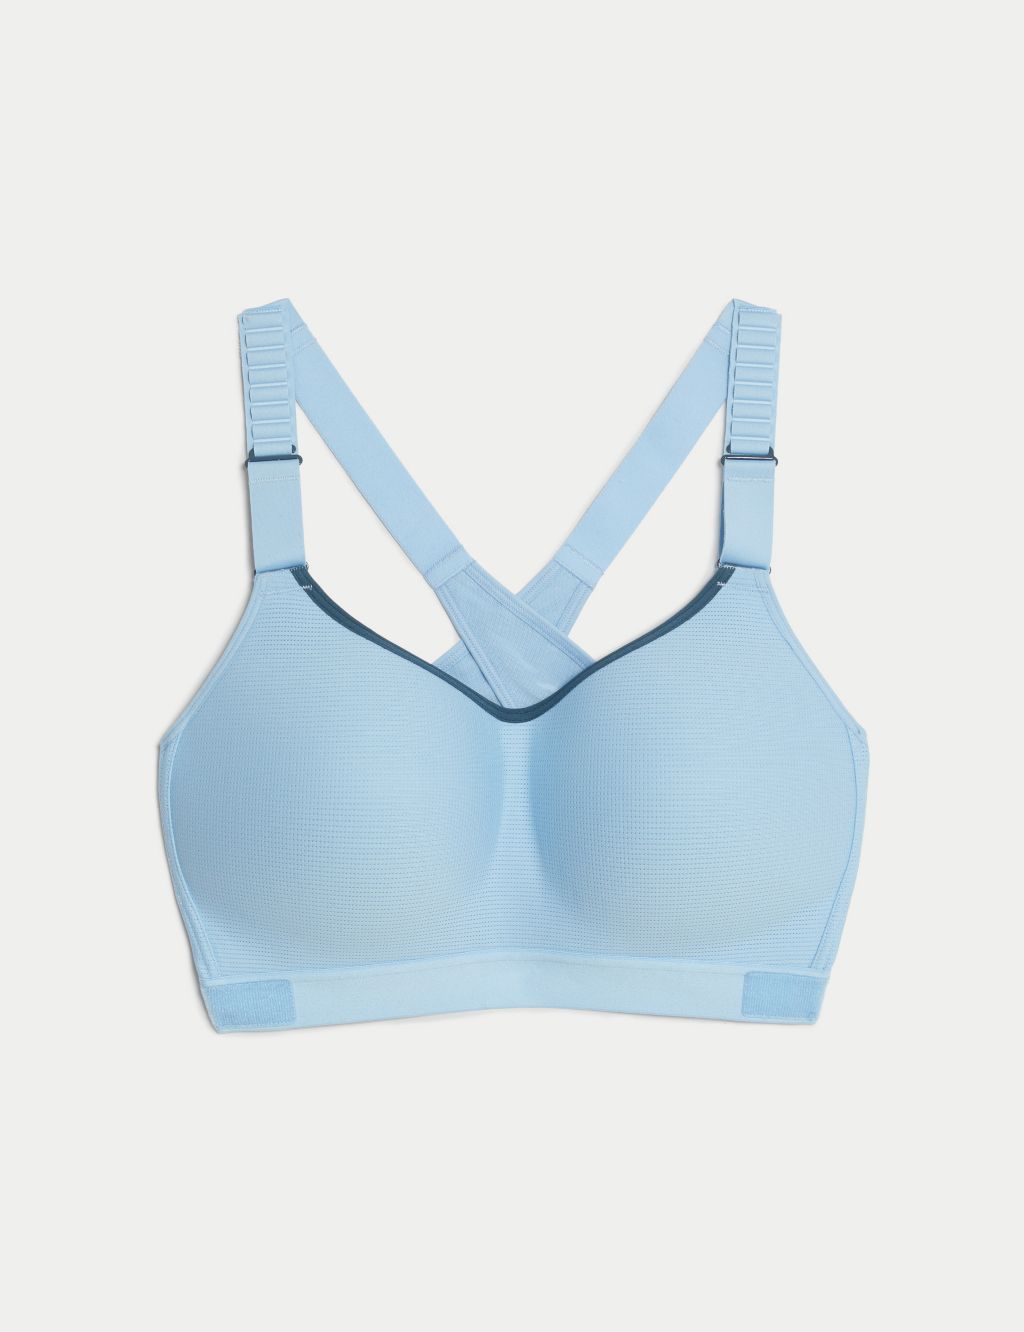 Ultimate Support Custom Fit Non Wired Sports Bra (A-E) image 1